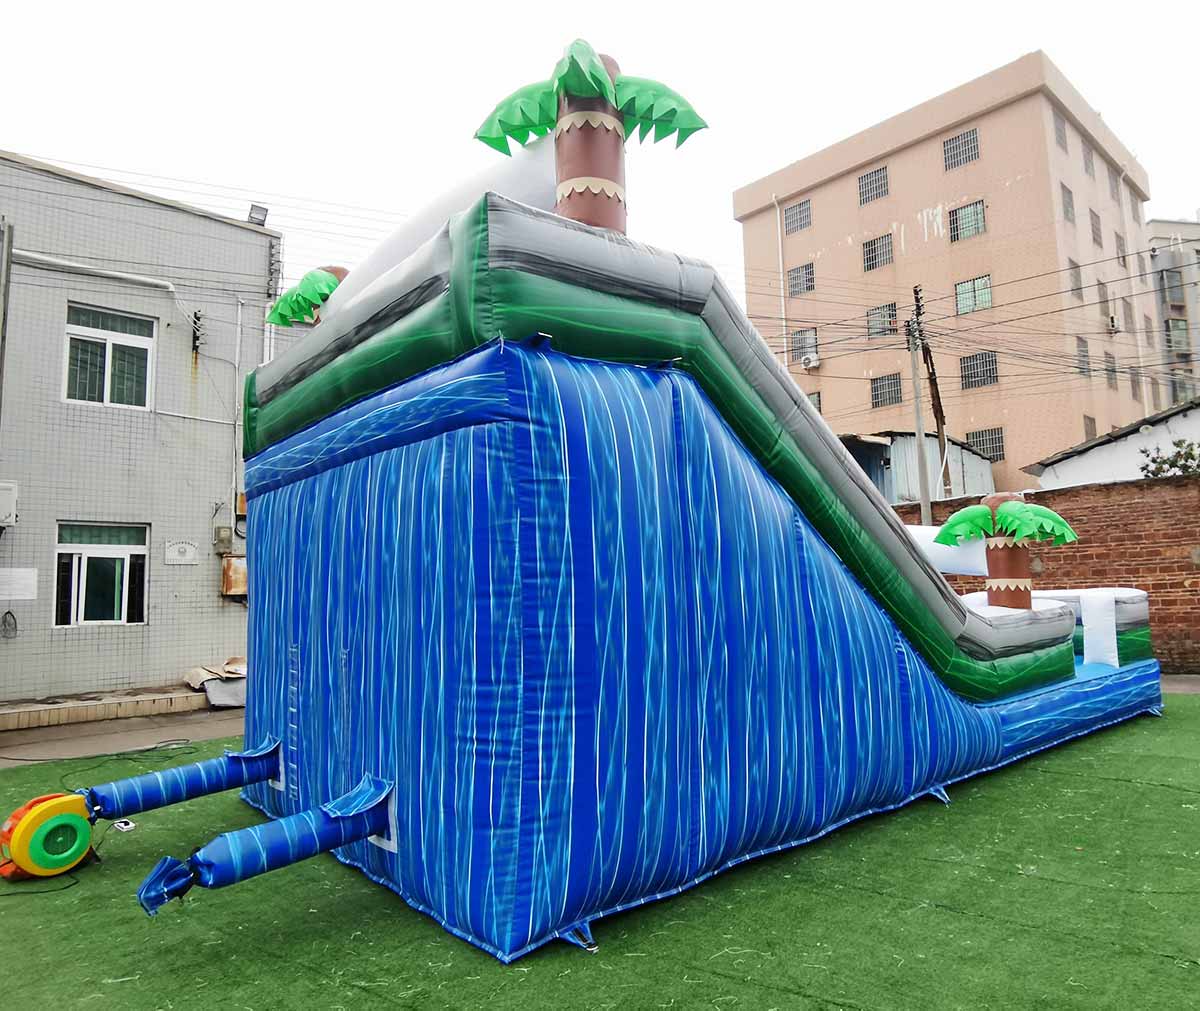 Tropical Jungle Double Lane Inflatable Waterslide